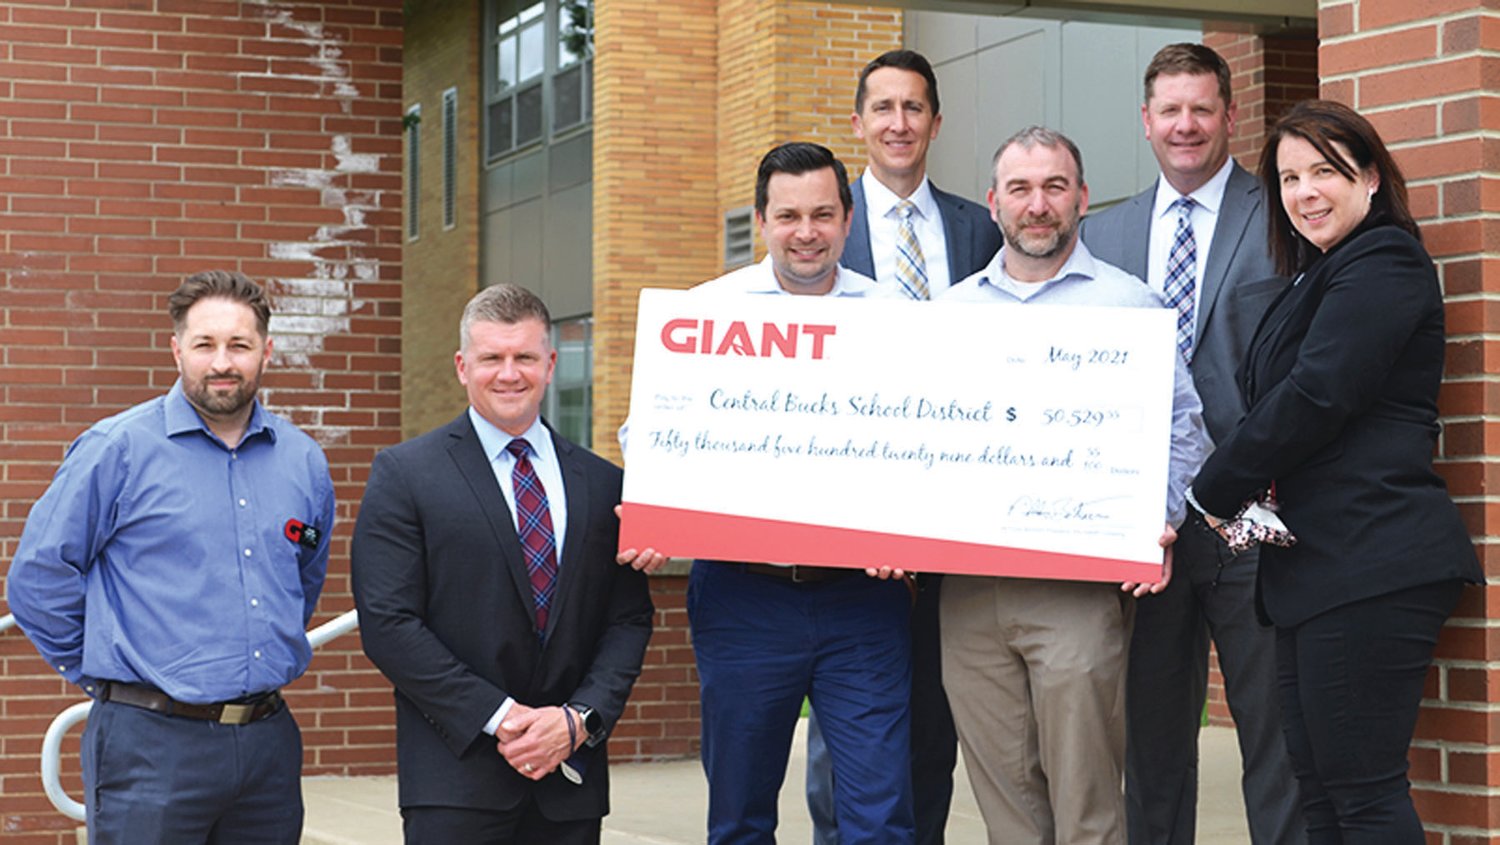 The Giant company presented a $50,529 donation at Butler Elementary School to Central Bucks School District to be used in support of its school food programs.